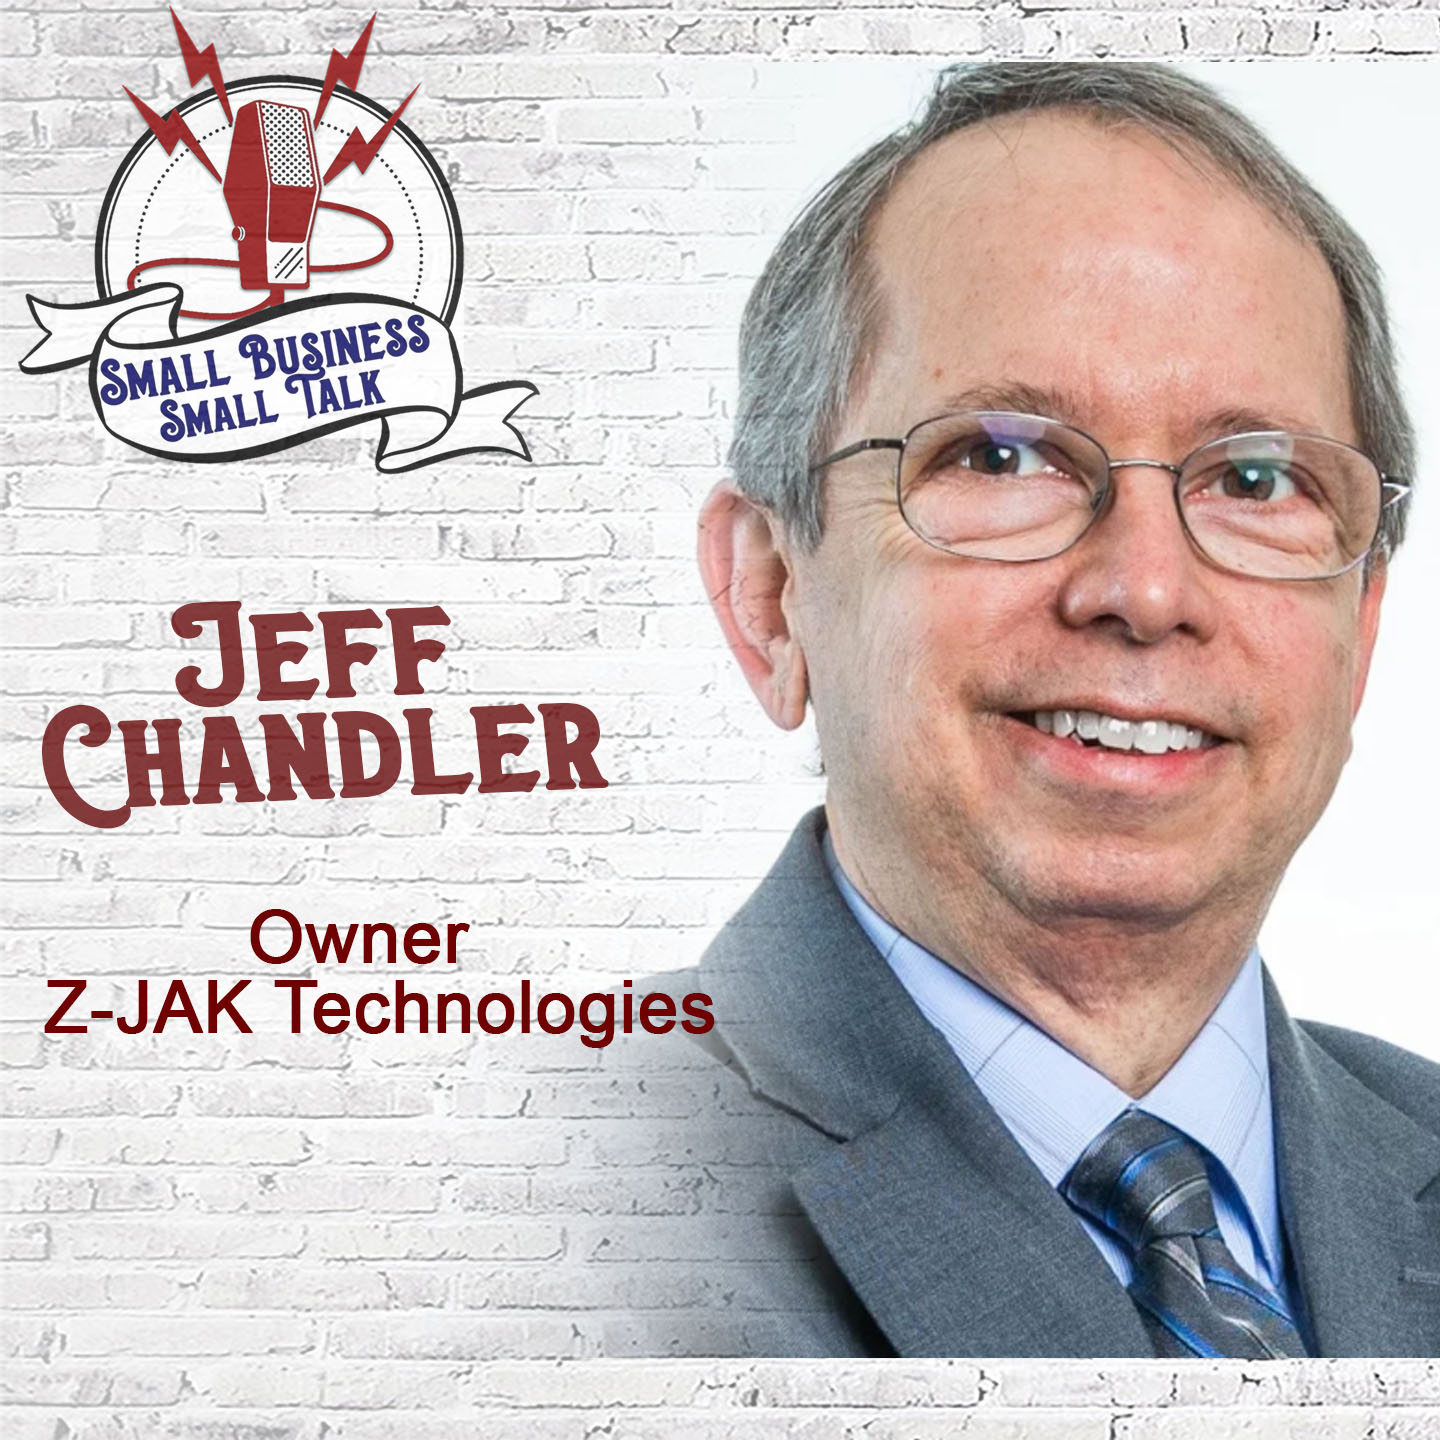 Helping small business with IT and cybersecurity, owner of Z-JAK Technologies, Jeff Chandler